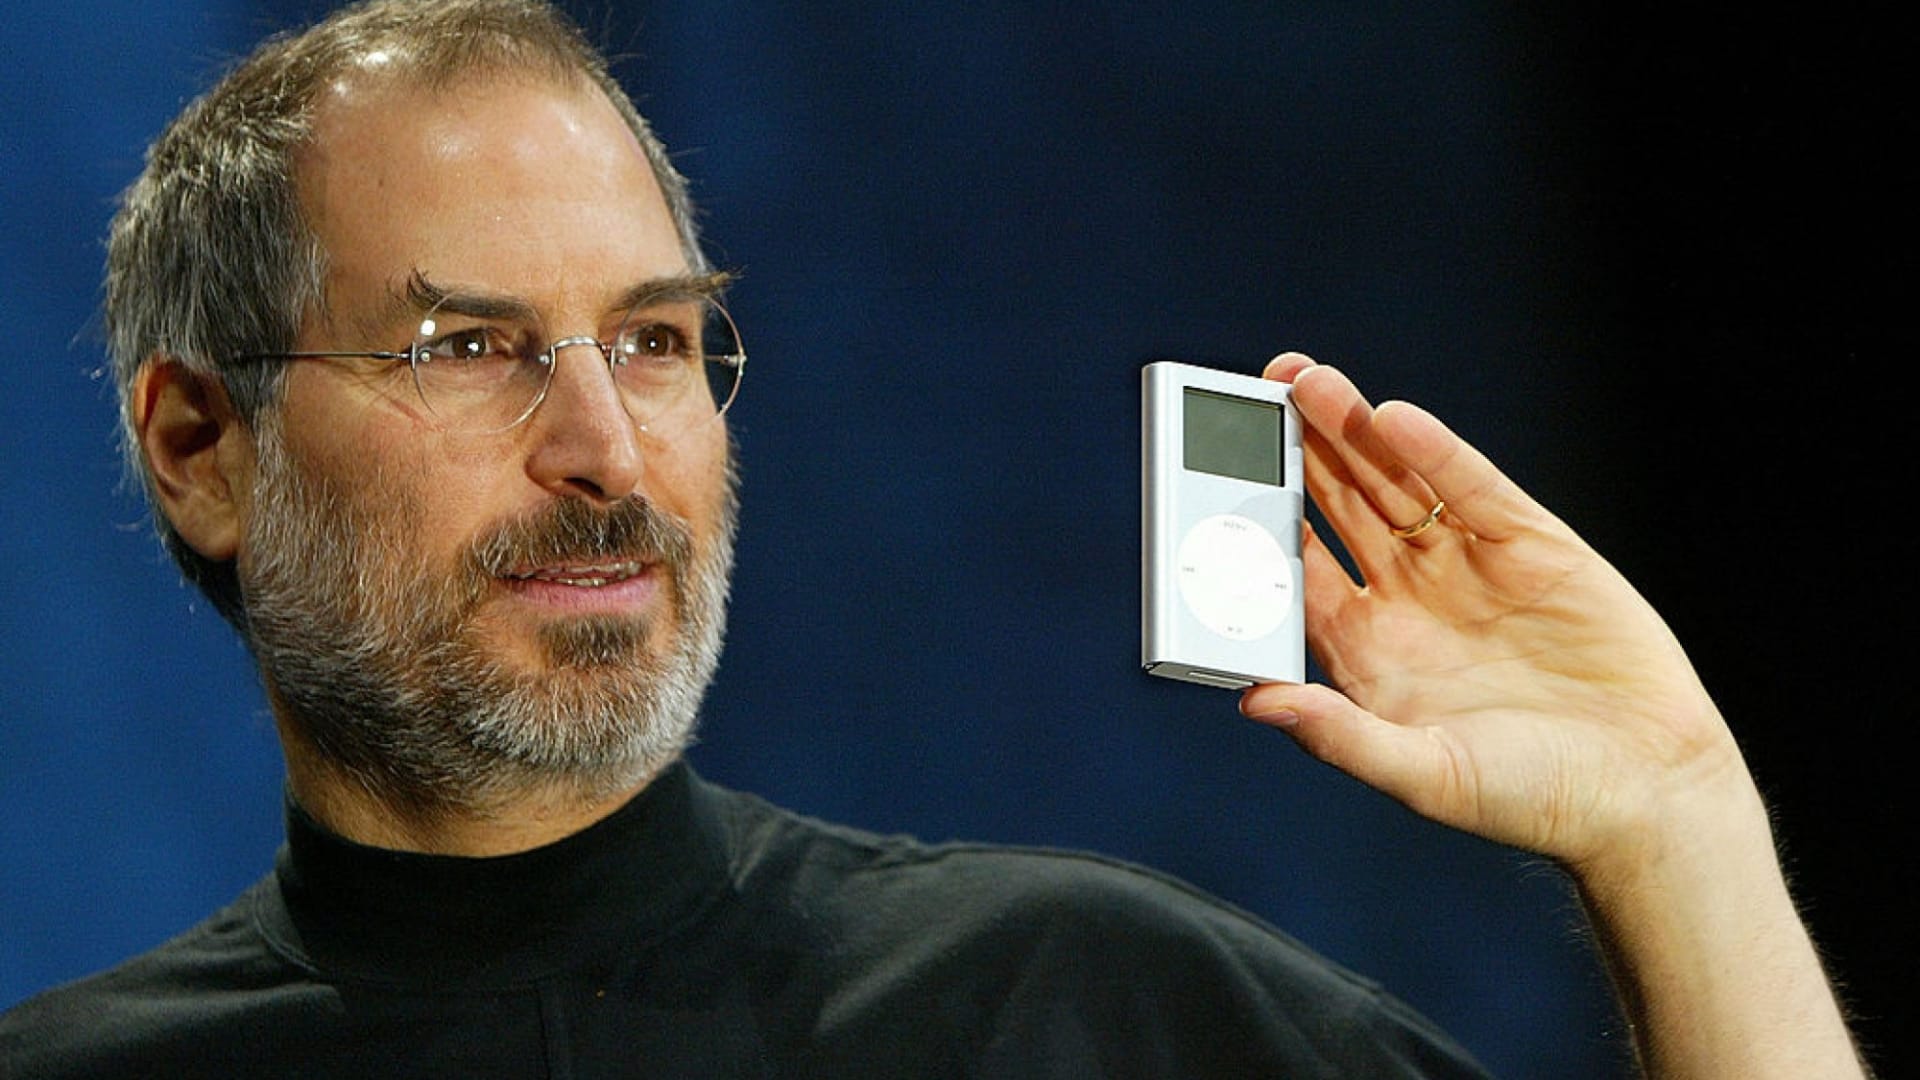 Steve Jobs introducing the iPod in October 2001.